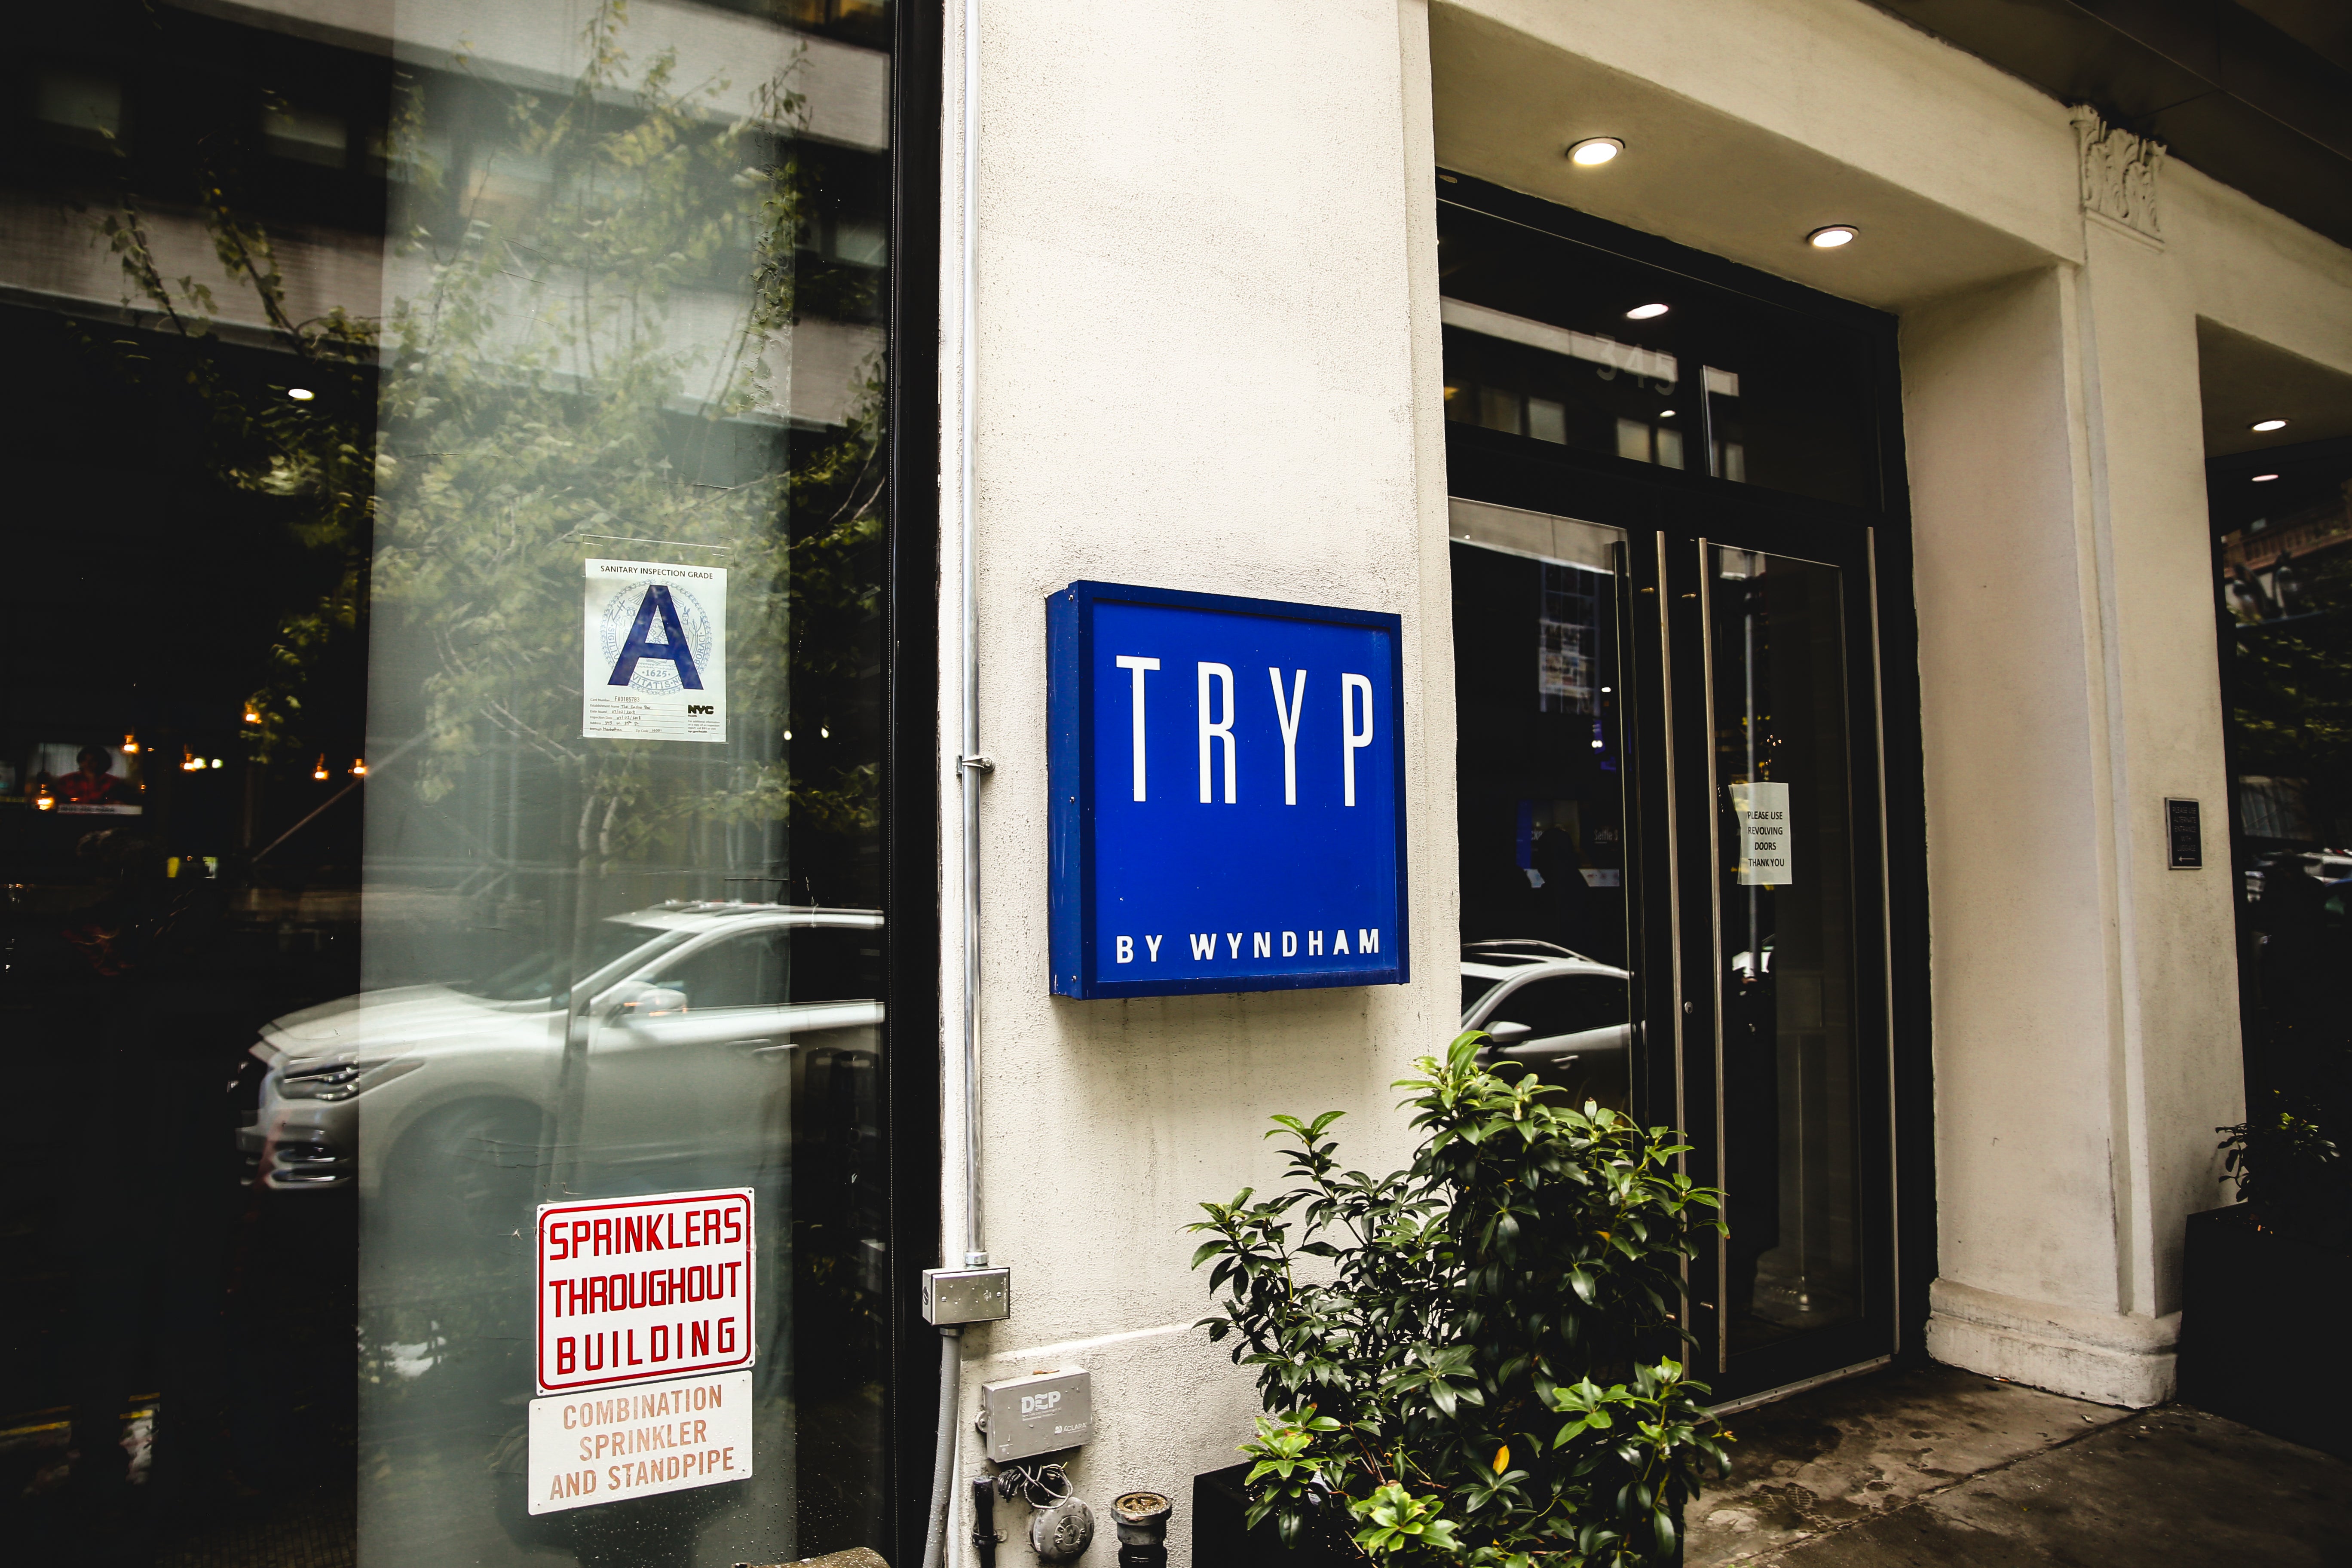 TRYP by Wyndham sign in New York City